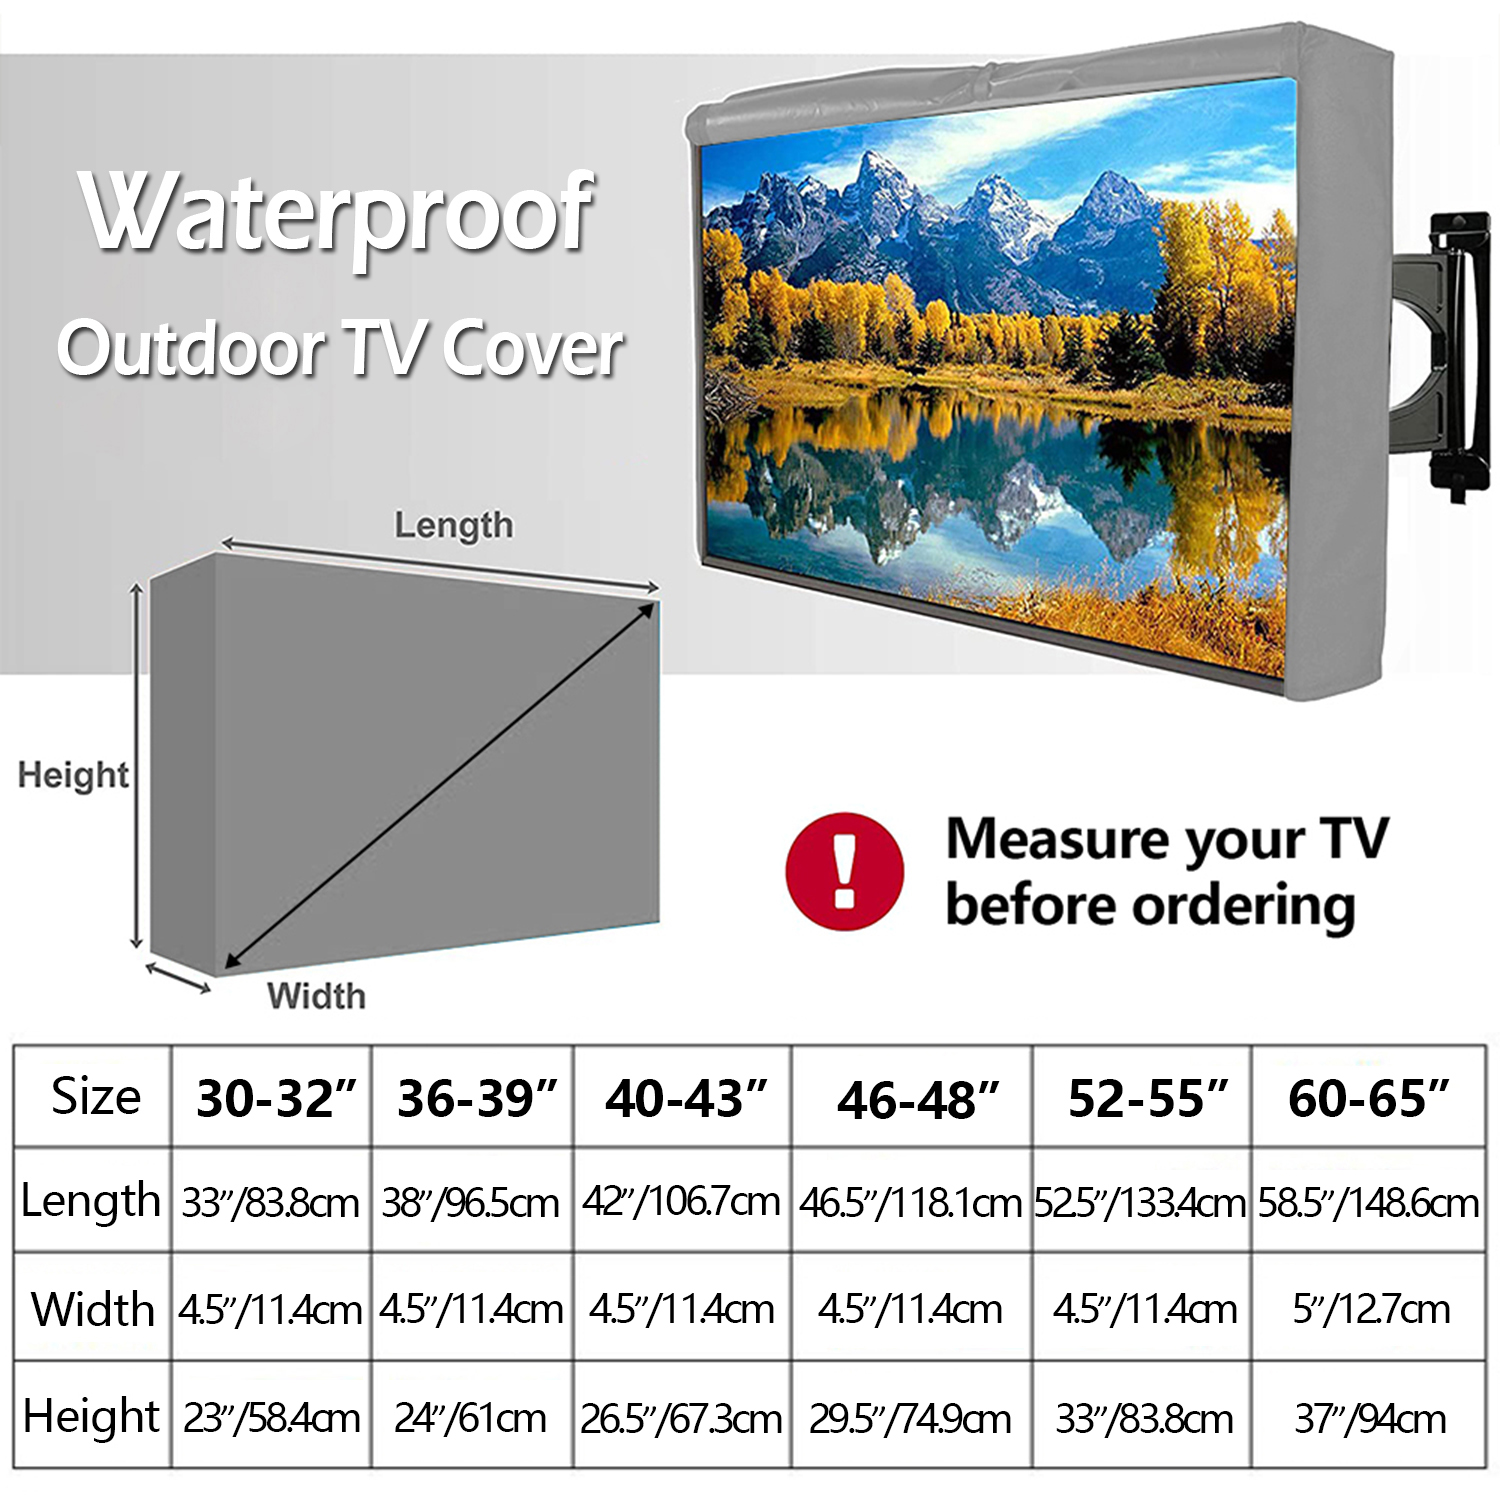 IC ICLOVER 60"-65" Outdoor Weatherproof LCD Plasma TV/Television Cover Flat Screen TV/Television Dustproof Protector with Waterproof Remote Pocket, Gray - image 3 of 9